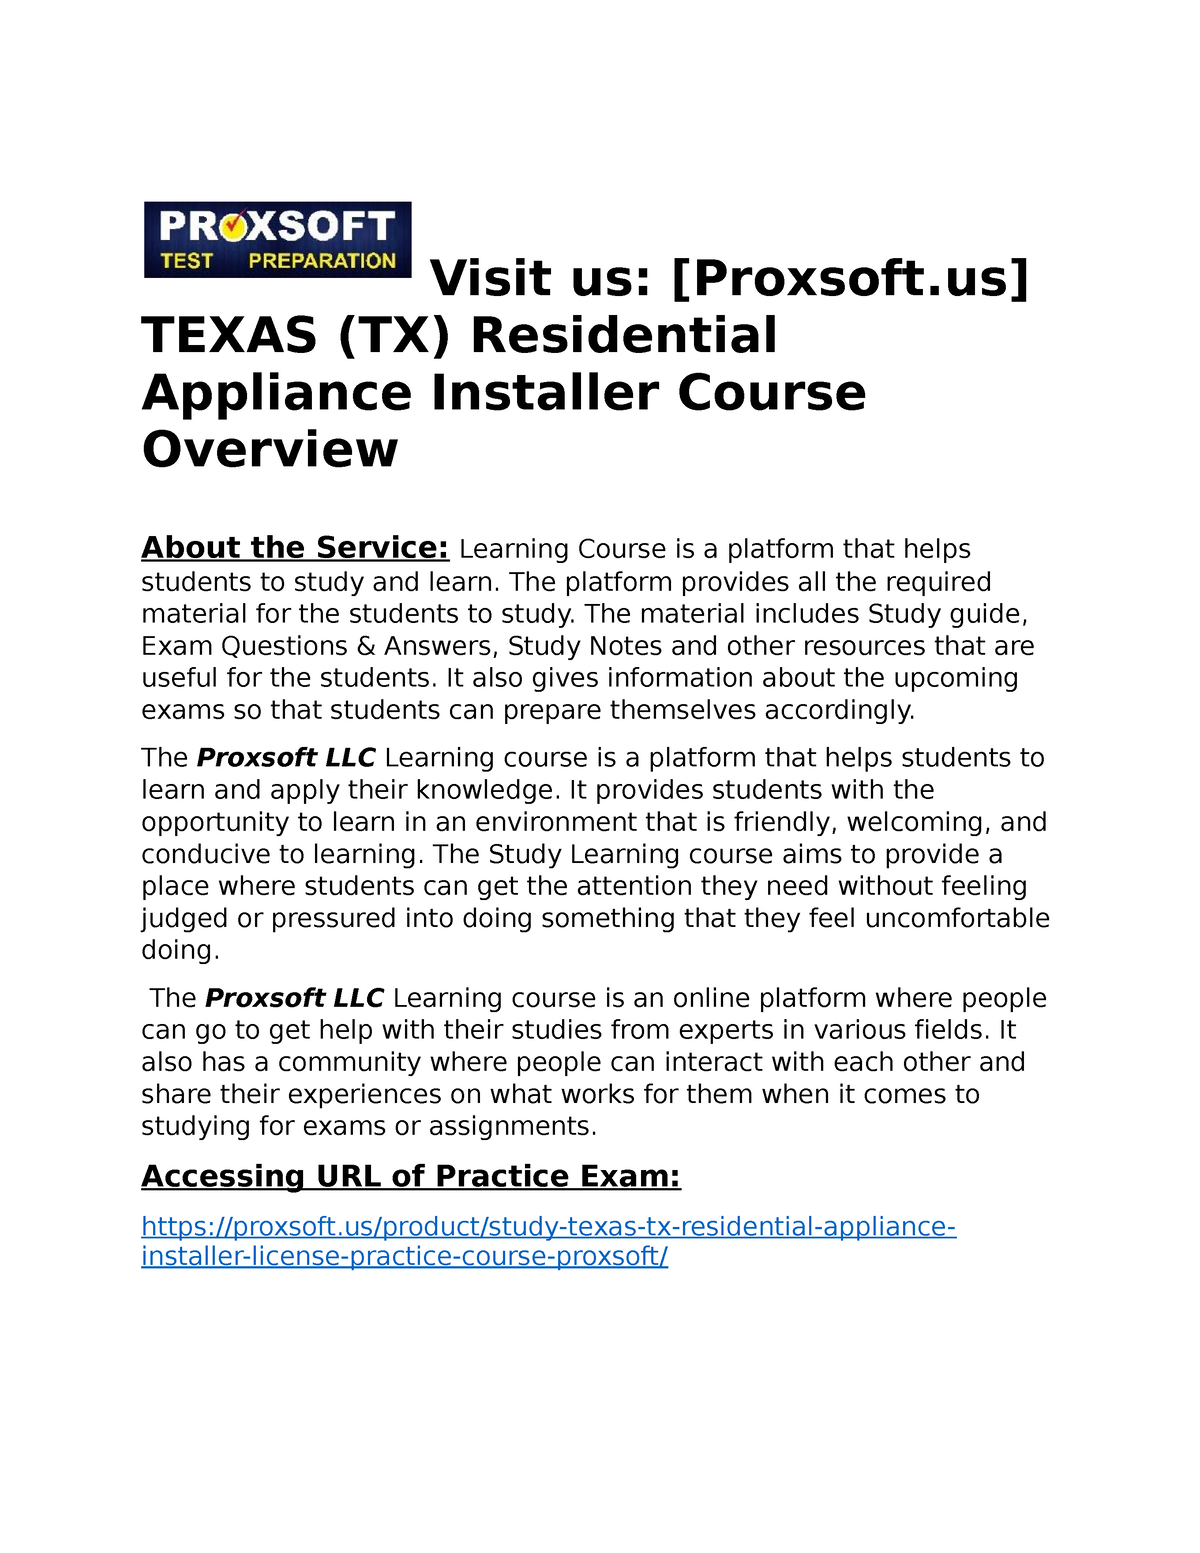 Montana residential appliance installer license prep class free download